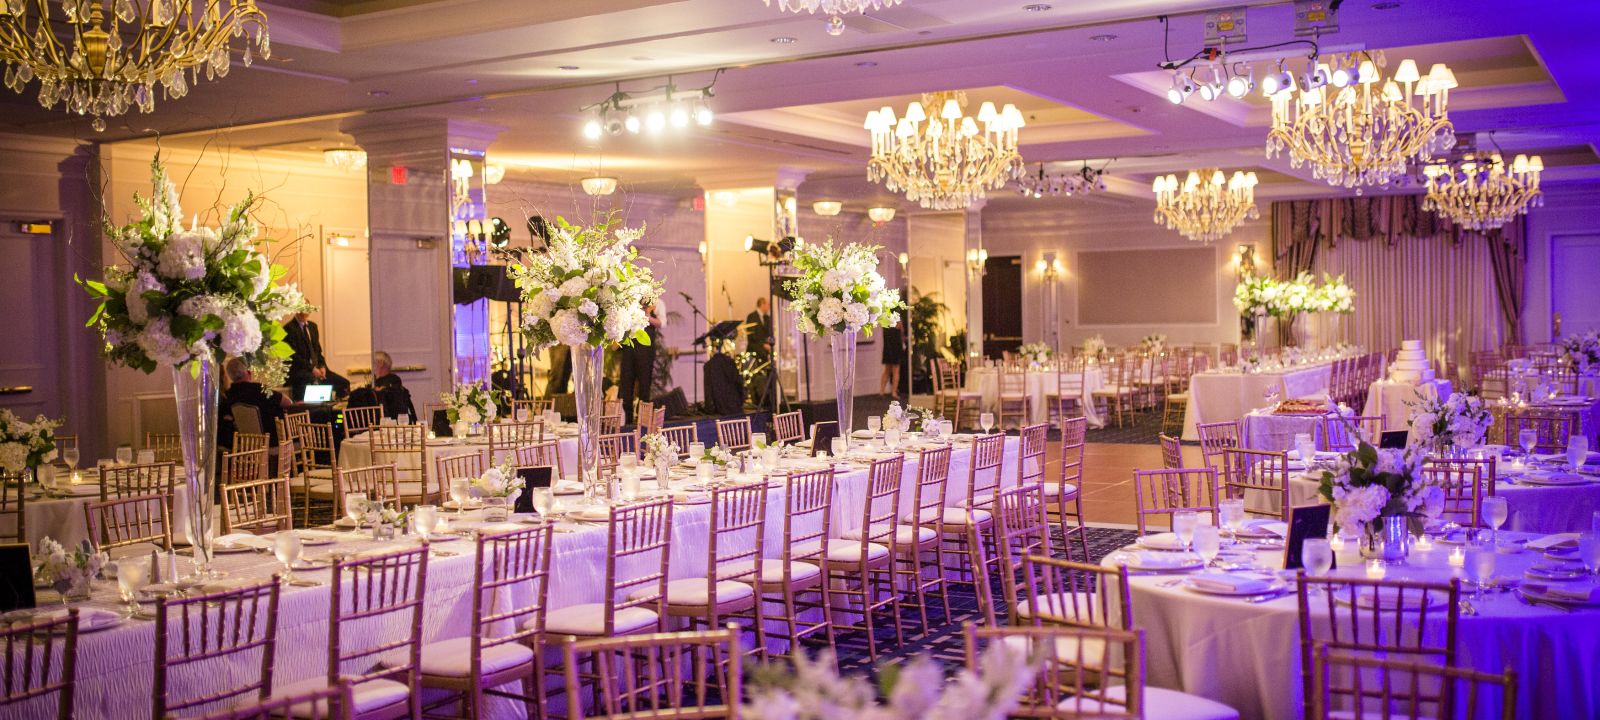 The Colonnade Hotel event space setup for a banquet or wedding with beautiful lighting at The Colonnade Hote in Bston